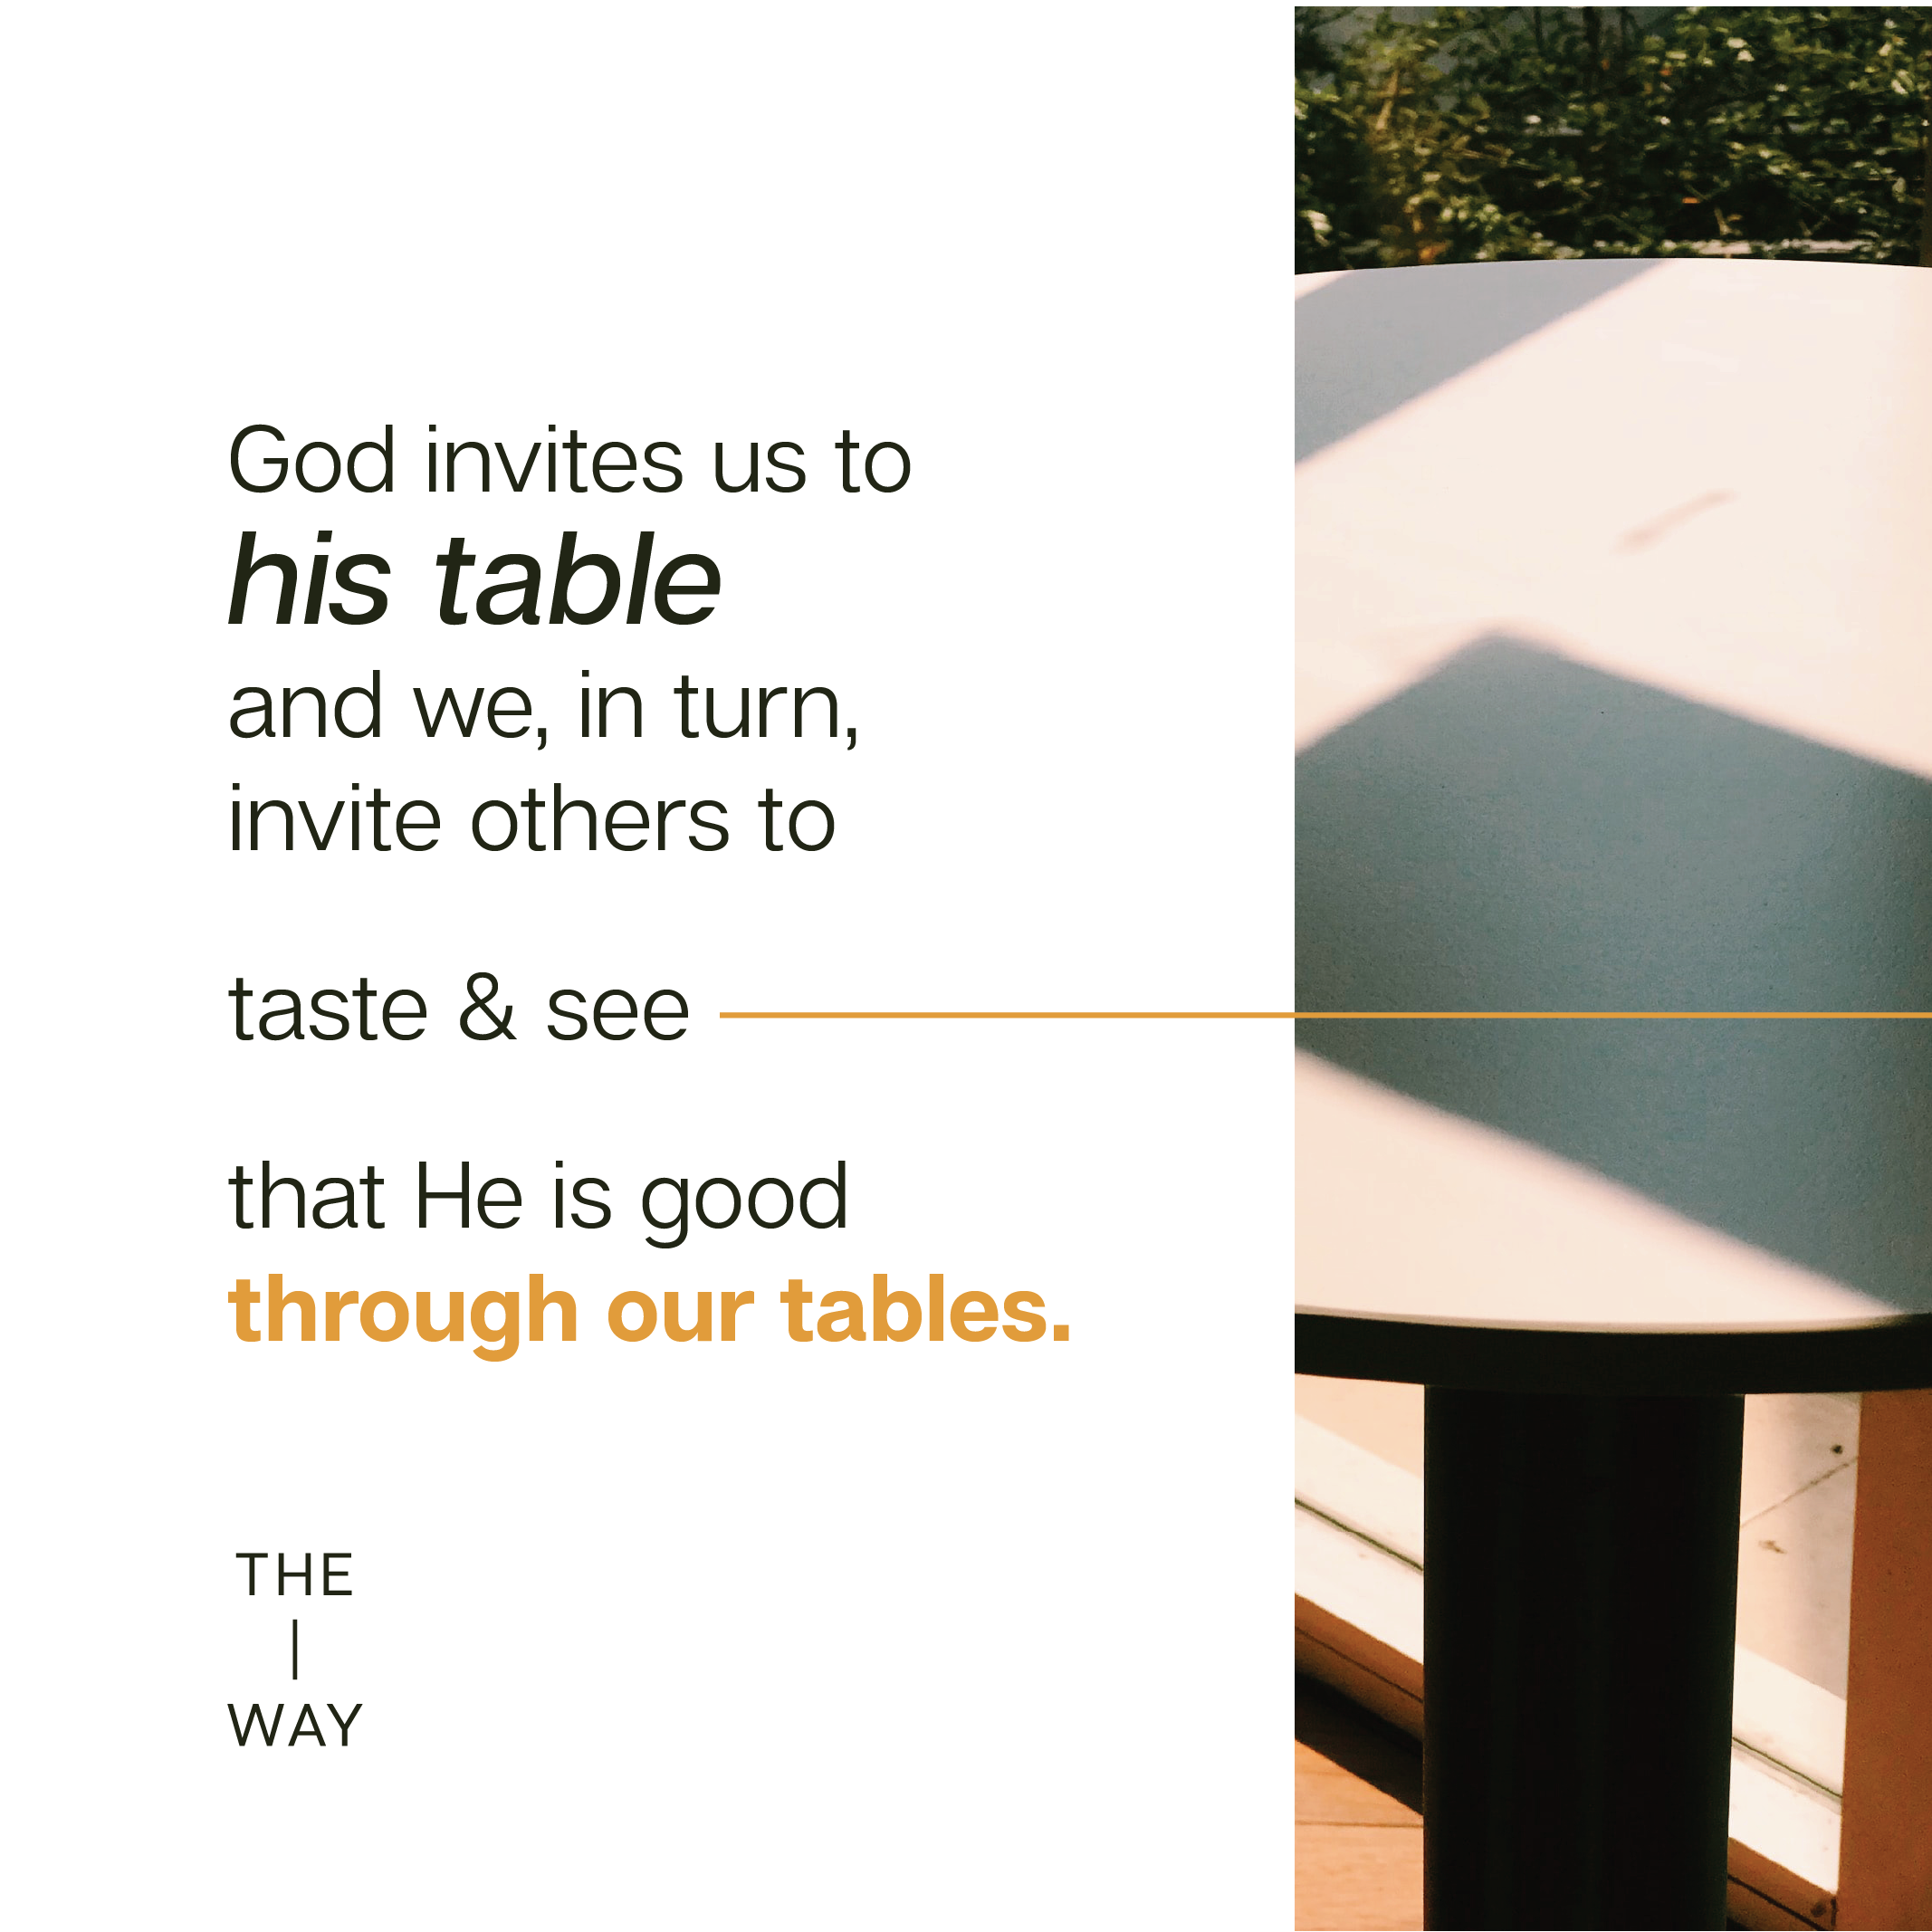 Christianity is not a Table-05.png